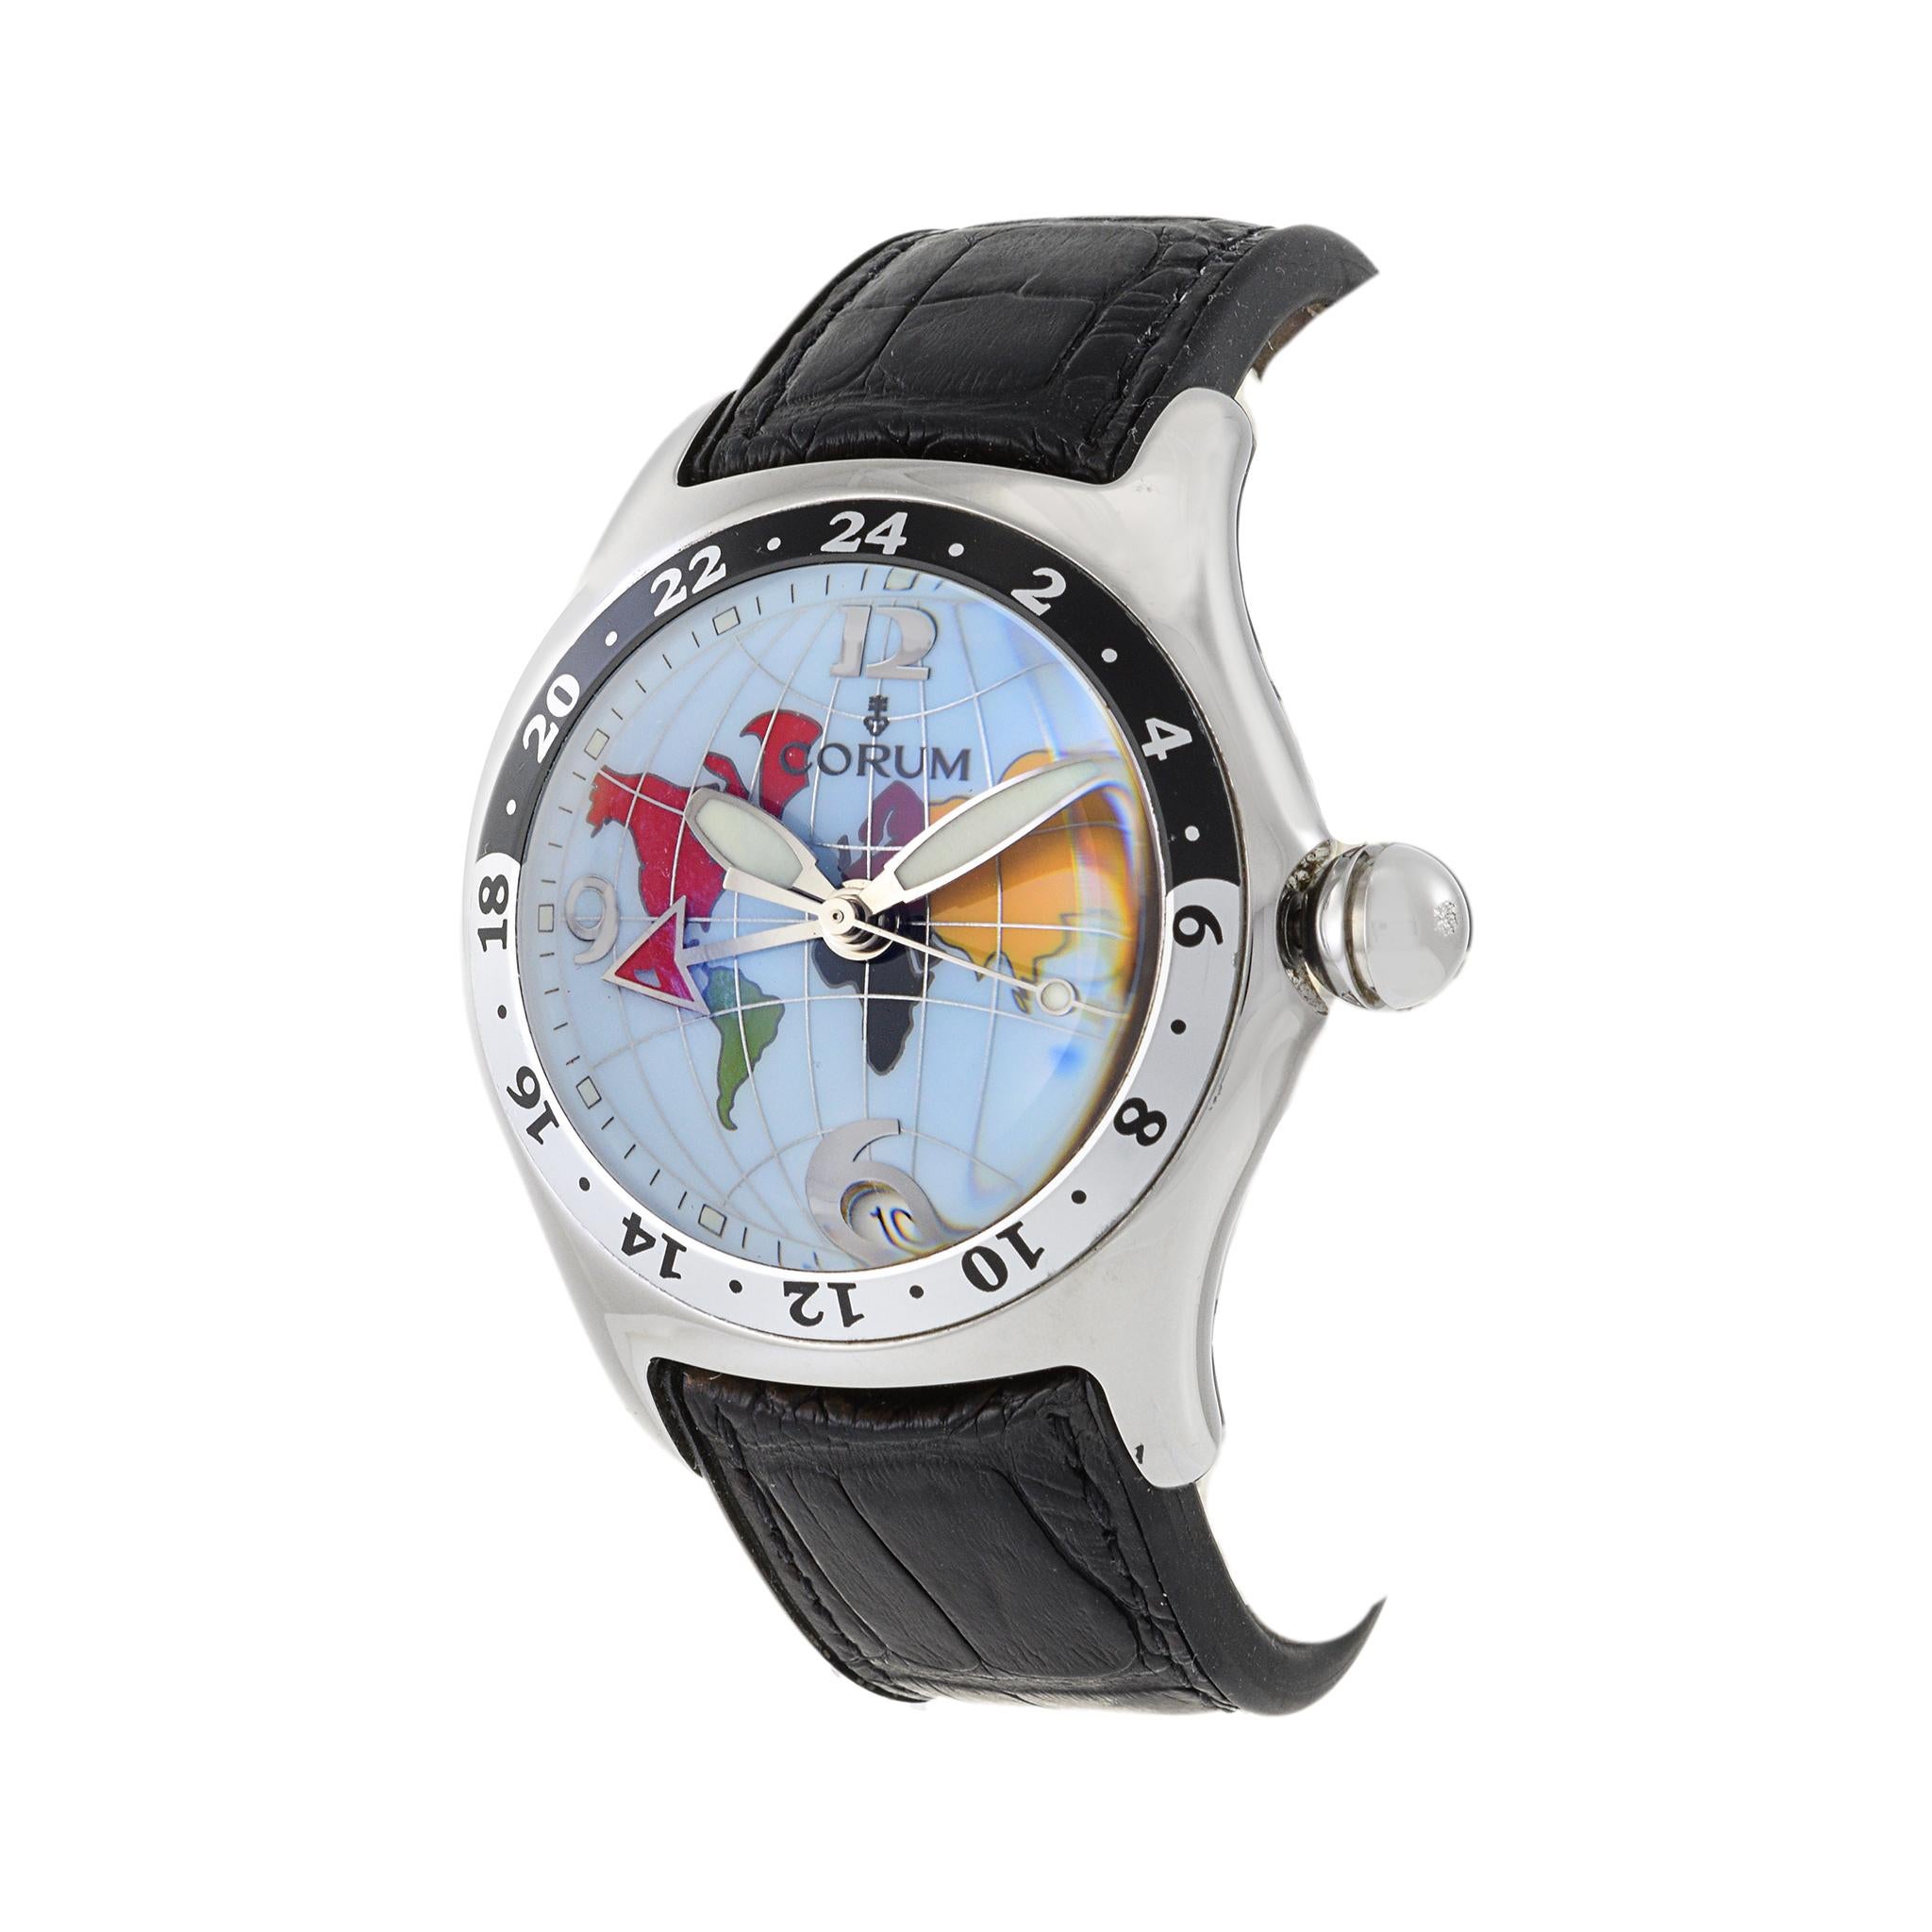 The Corum Bubble GMT 383.250.20 is an automatic watch that embodies both elegance and functionality. Its features include a stainless steel case and bezel, with a diameter of 44mm and a distinct blue dial that showcases a global map motif,